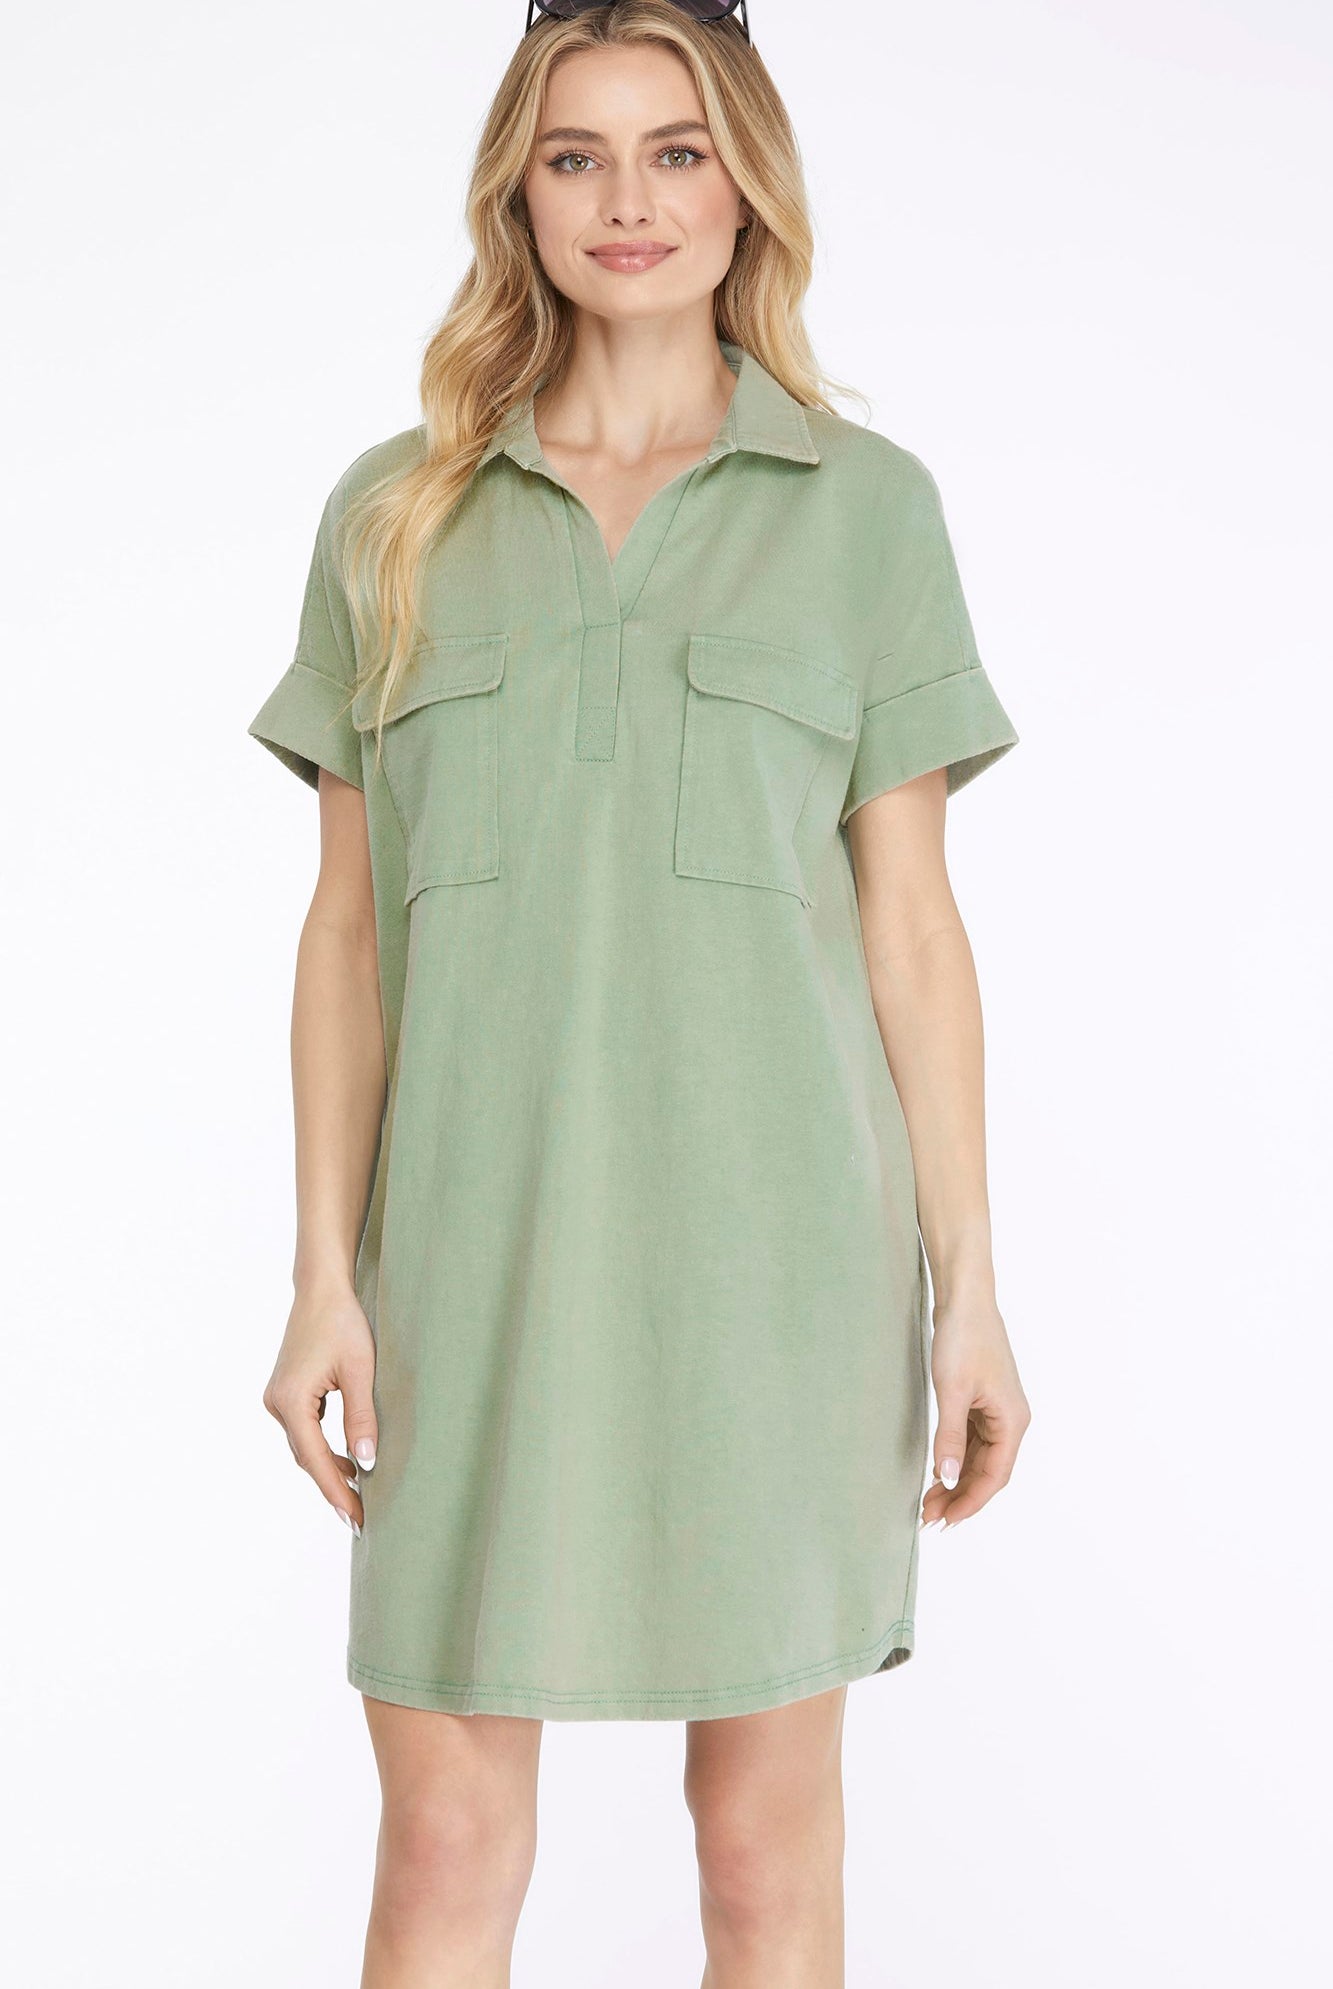 Avery Short Sleeve Washed Collared Dress with Pockets - Be You Boutique